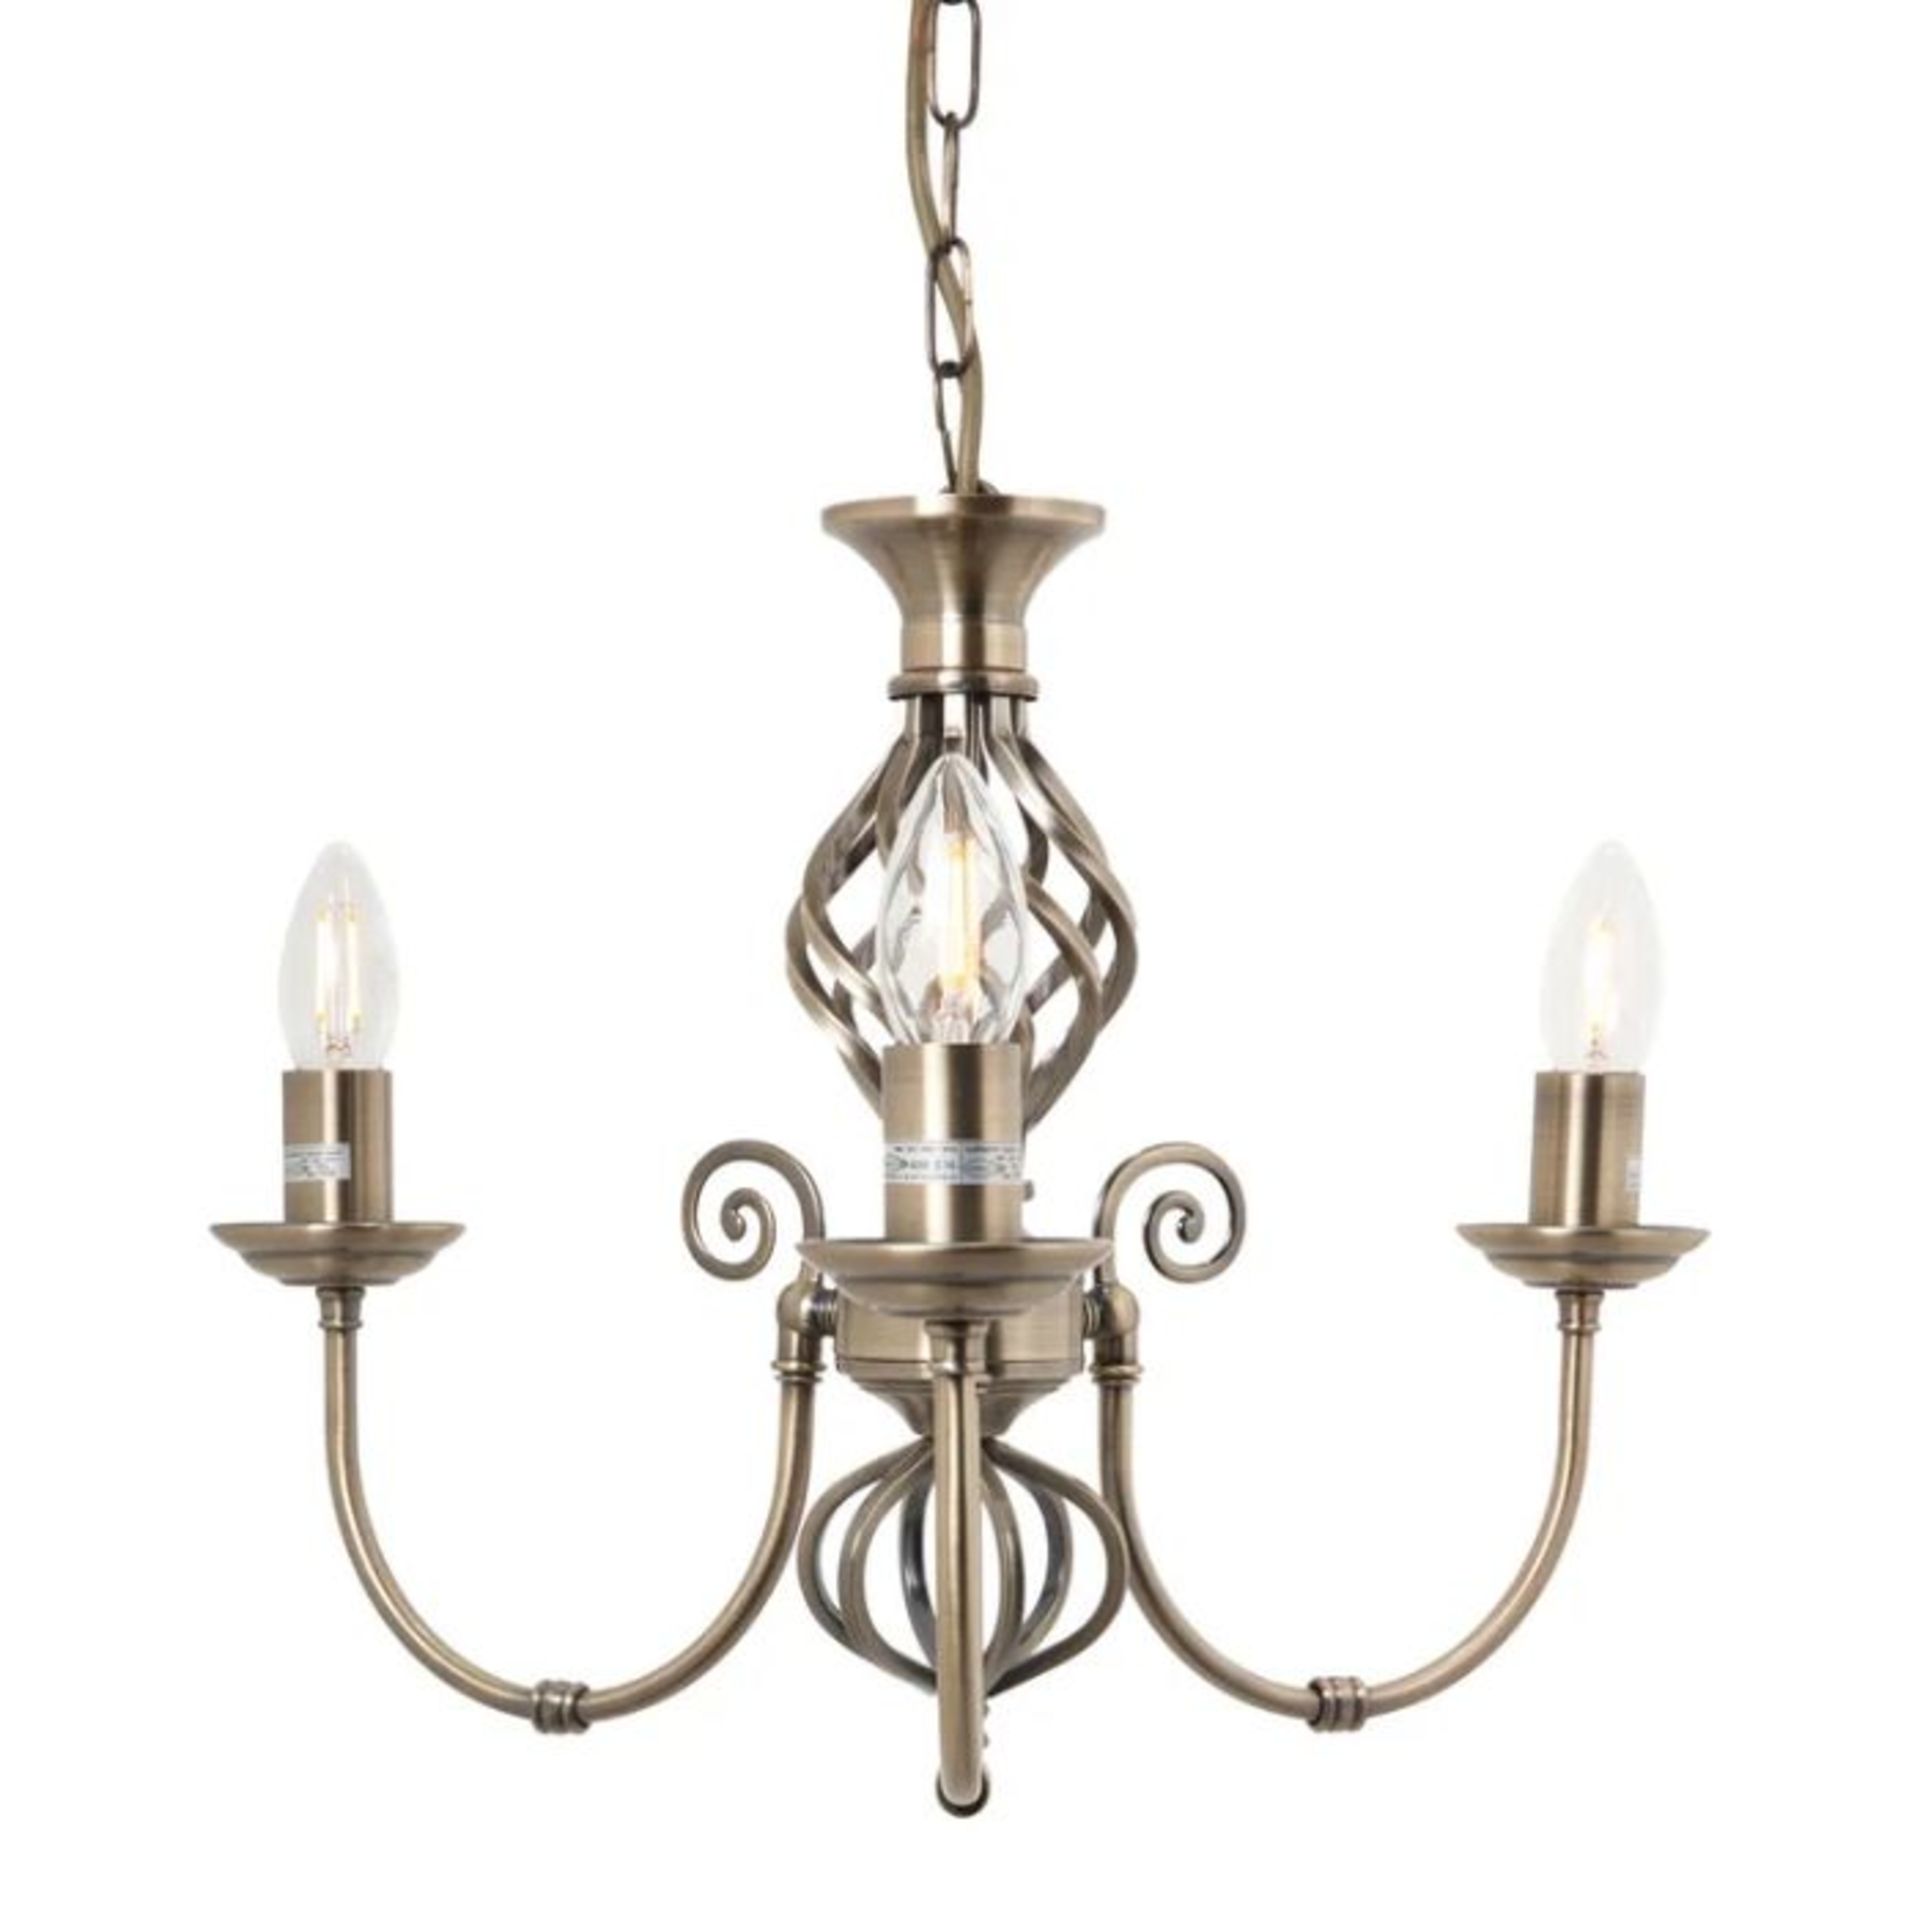 Gillam 3 - Light Candle Style Chandelier (ANTIQUE BRASS FINISH) (246858/33)